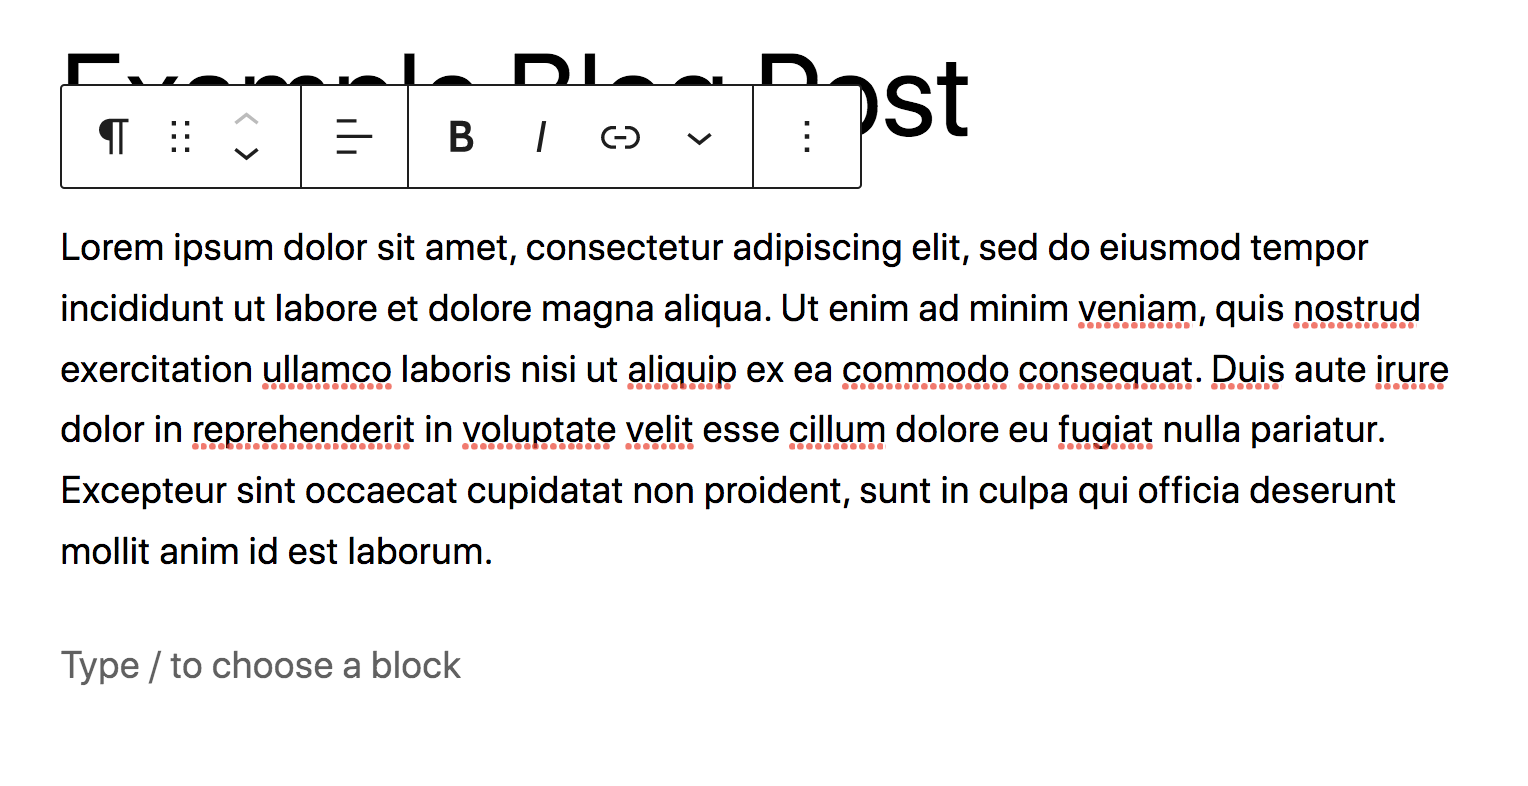 block toolbar with options to bold text, italicize text, and more.